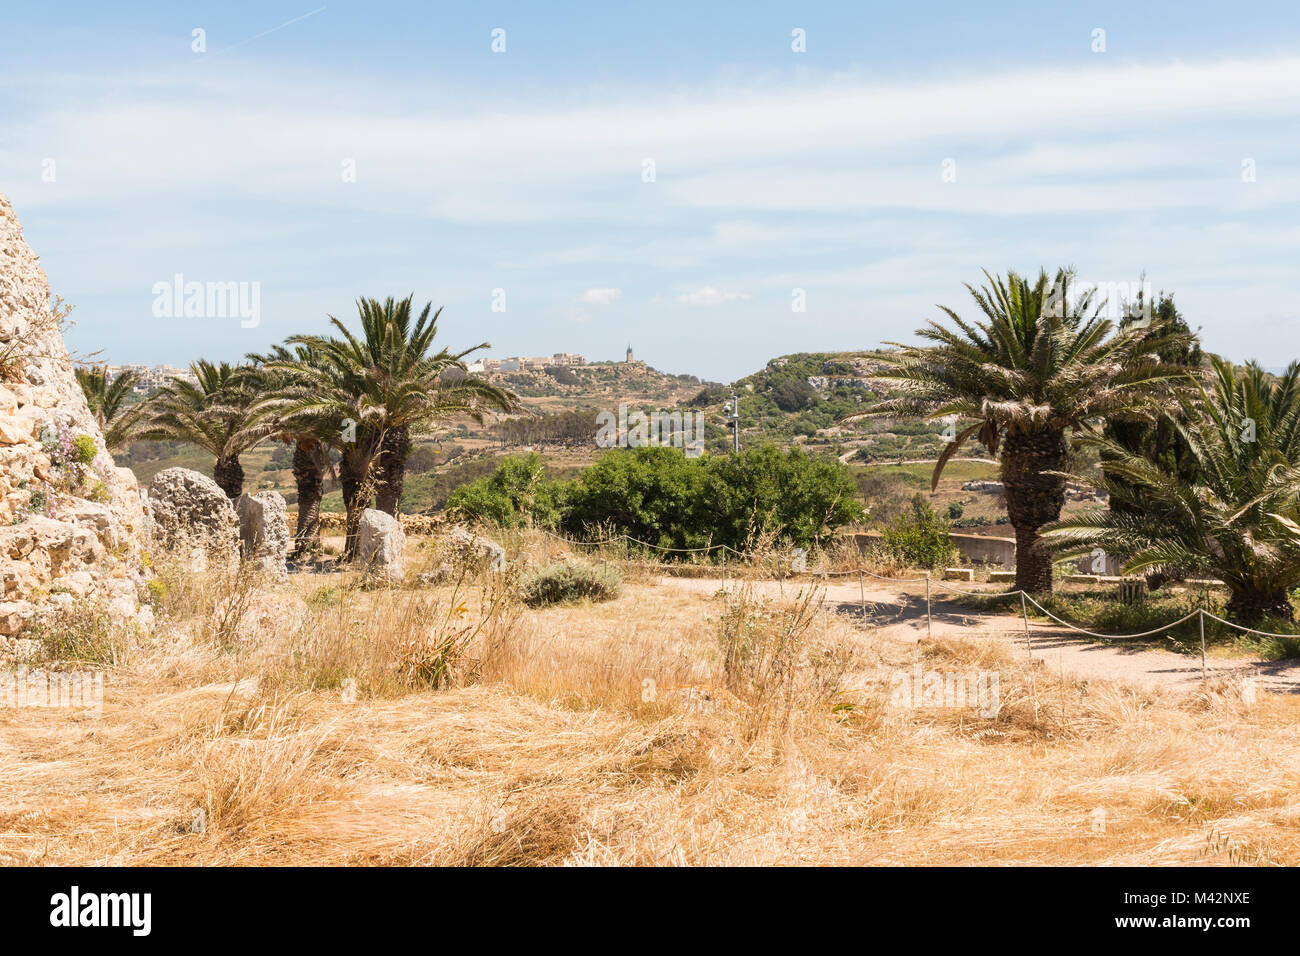 An image showing the palm trees, dried grasses and surrounding countryside, viewed from the temples at  Gozo, Malta Stock Photo